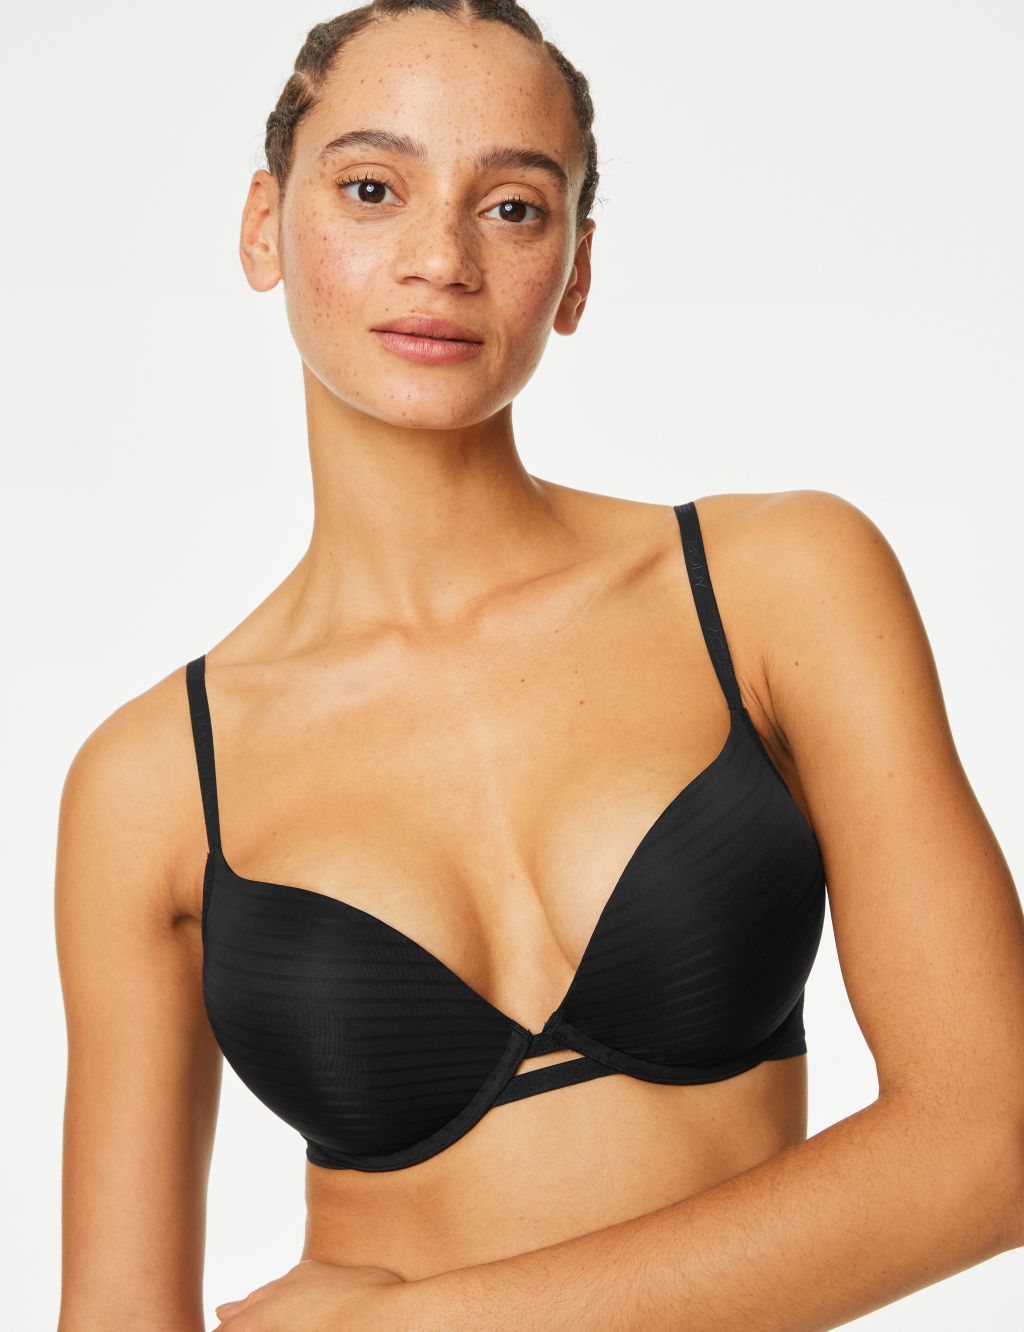 File This One Under: With this Push Up Bra for Men, You've